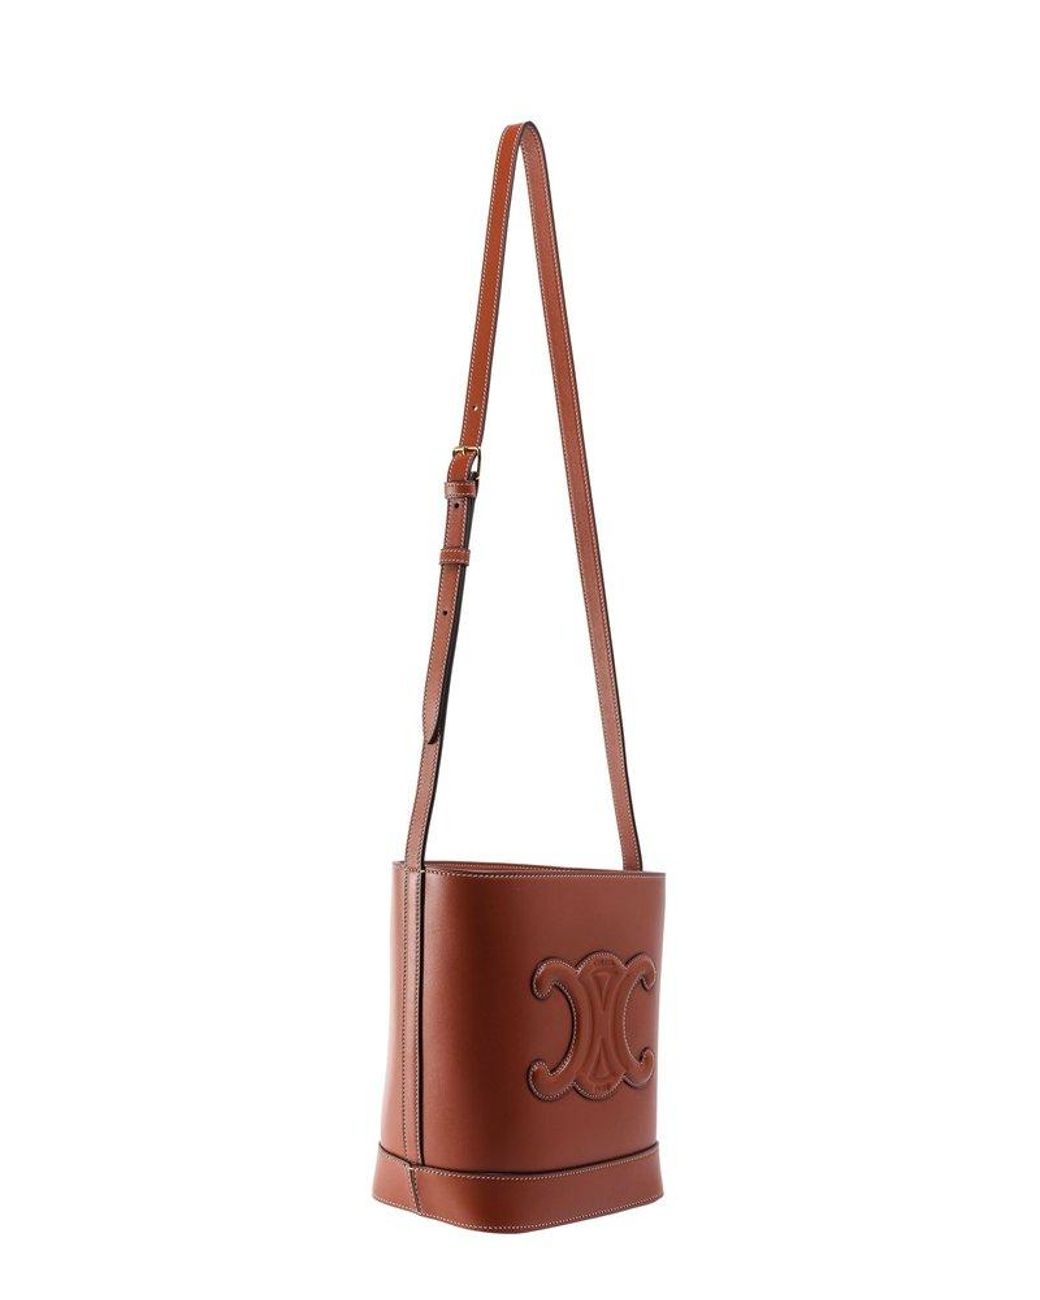 Celine Small Bucket Leather Tote